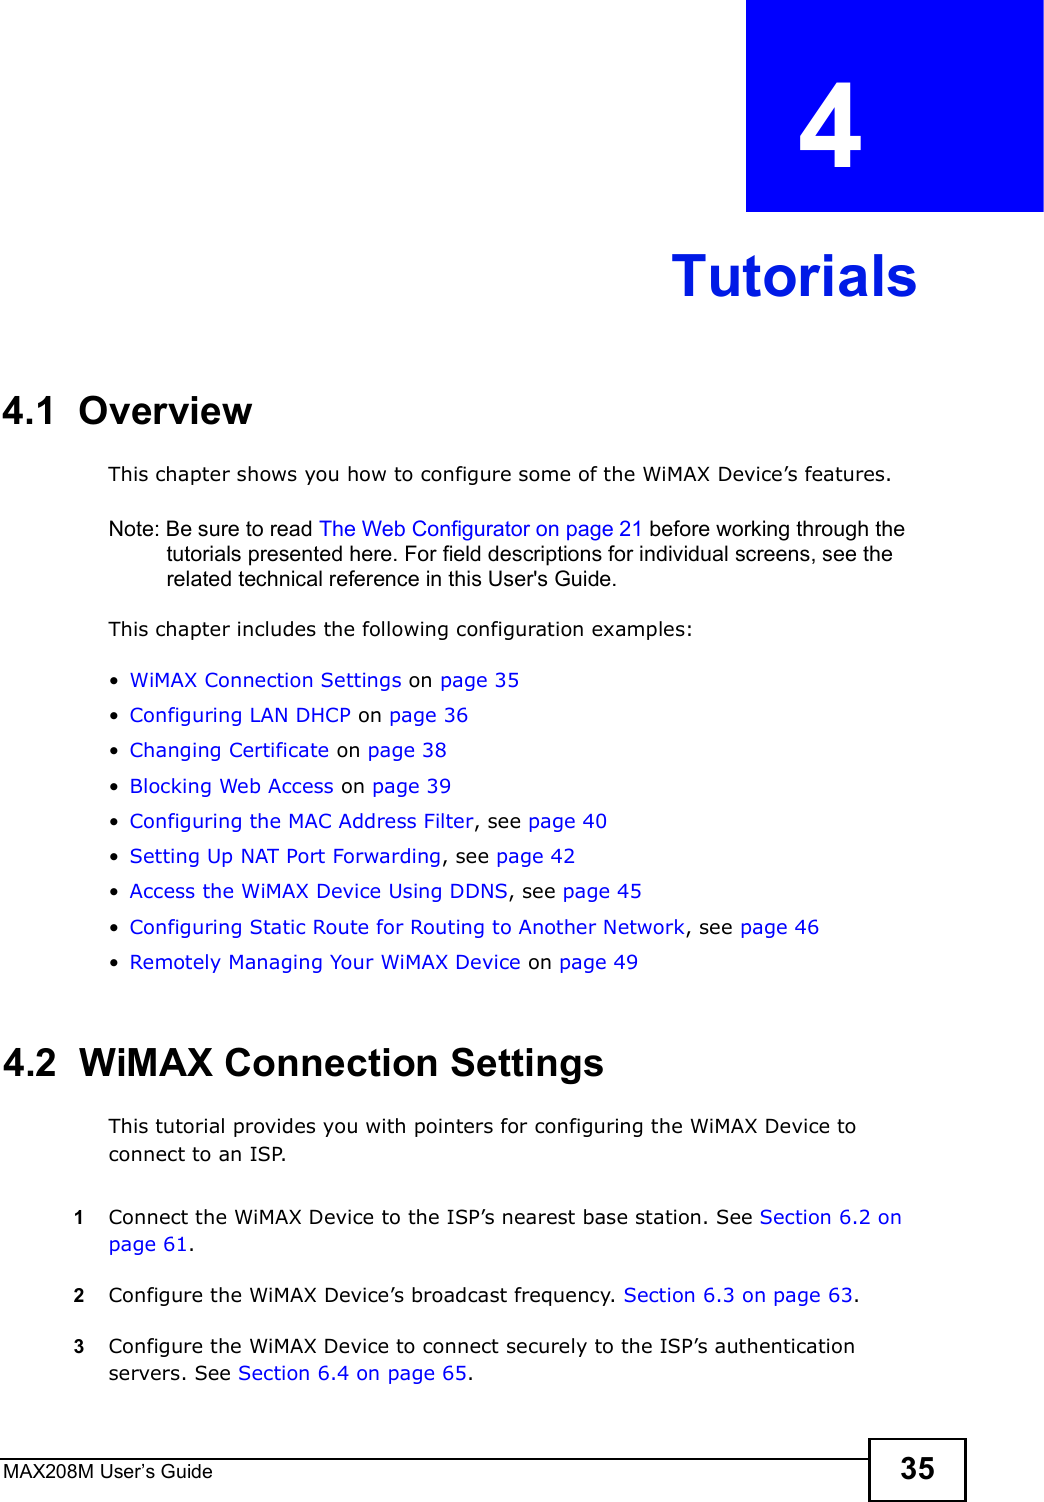 MAX208M User s Guide 35CHAPTER  4 Tutorials4.1  OverviewThis chapter shows you how to configure some of the WiMAX Device s features.Note: Be sure to read The Web Configurator on page 21 before working through the tutorials presented here. For field descriptions for individual screens, see the related technical reference in this User&apos;s Guide.This chapter includes the following configuration examples:!WiMAX Connection Settings on page 35!Configuring LAN DHCP on page 36!Changing Certificate on page 38!Blocking Web Access on page 39!Configuring the MAC Address Filter, see page40!Setting Up NAT Port Forwarding, see page 42!Access the WiMAX Device Using DDNS, see page 45!Configuring Static Route for Routing to Another Network, see page 46!Remotely Managing Your WiMAX Device on page 494.2  WiMAX Connection SettingsThis tutorial provides you with pointers for configuring the WiMAX Device to connect to an ISP.1Connect the WiMAX Device to the ISP s nearest base station. See Section 6.2 on page 61.2Configure the WiMAX Device s broadcast frequency. Section 6.3 on page 63.3Configure the WiMAX Device to connect securely to the ISP s authentication servers. See Section 6.4 on page 65.